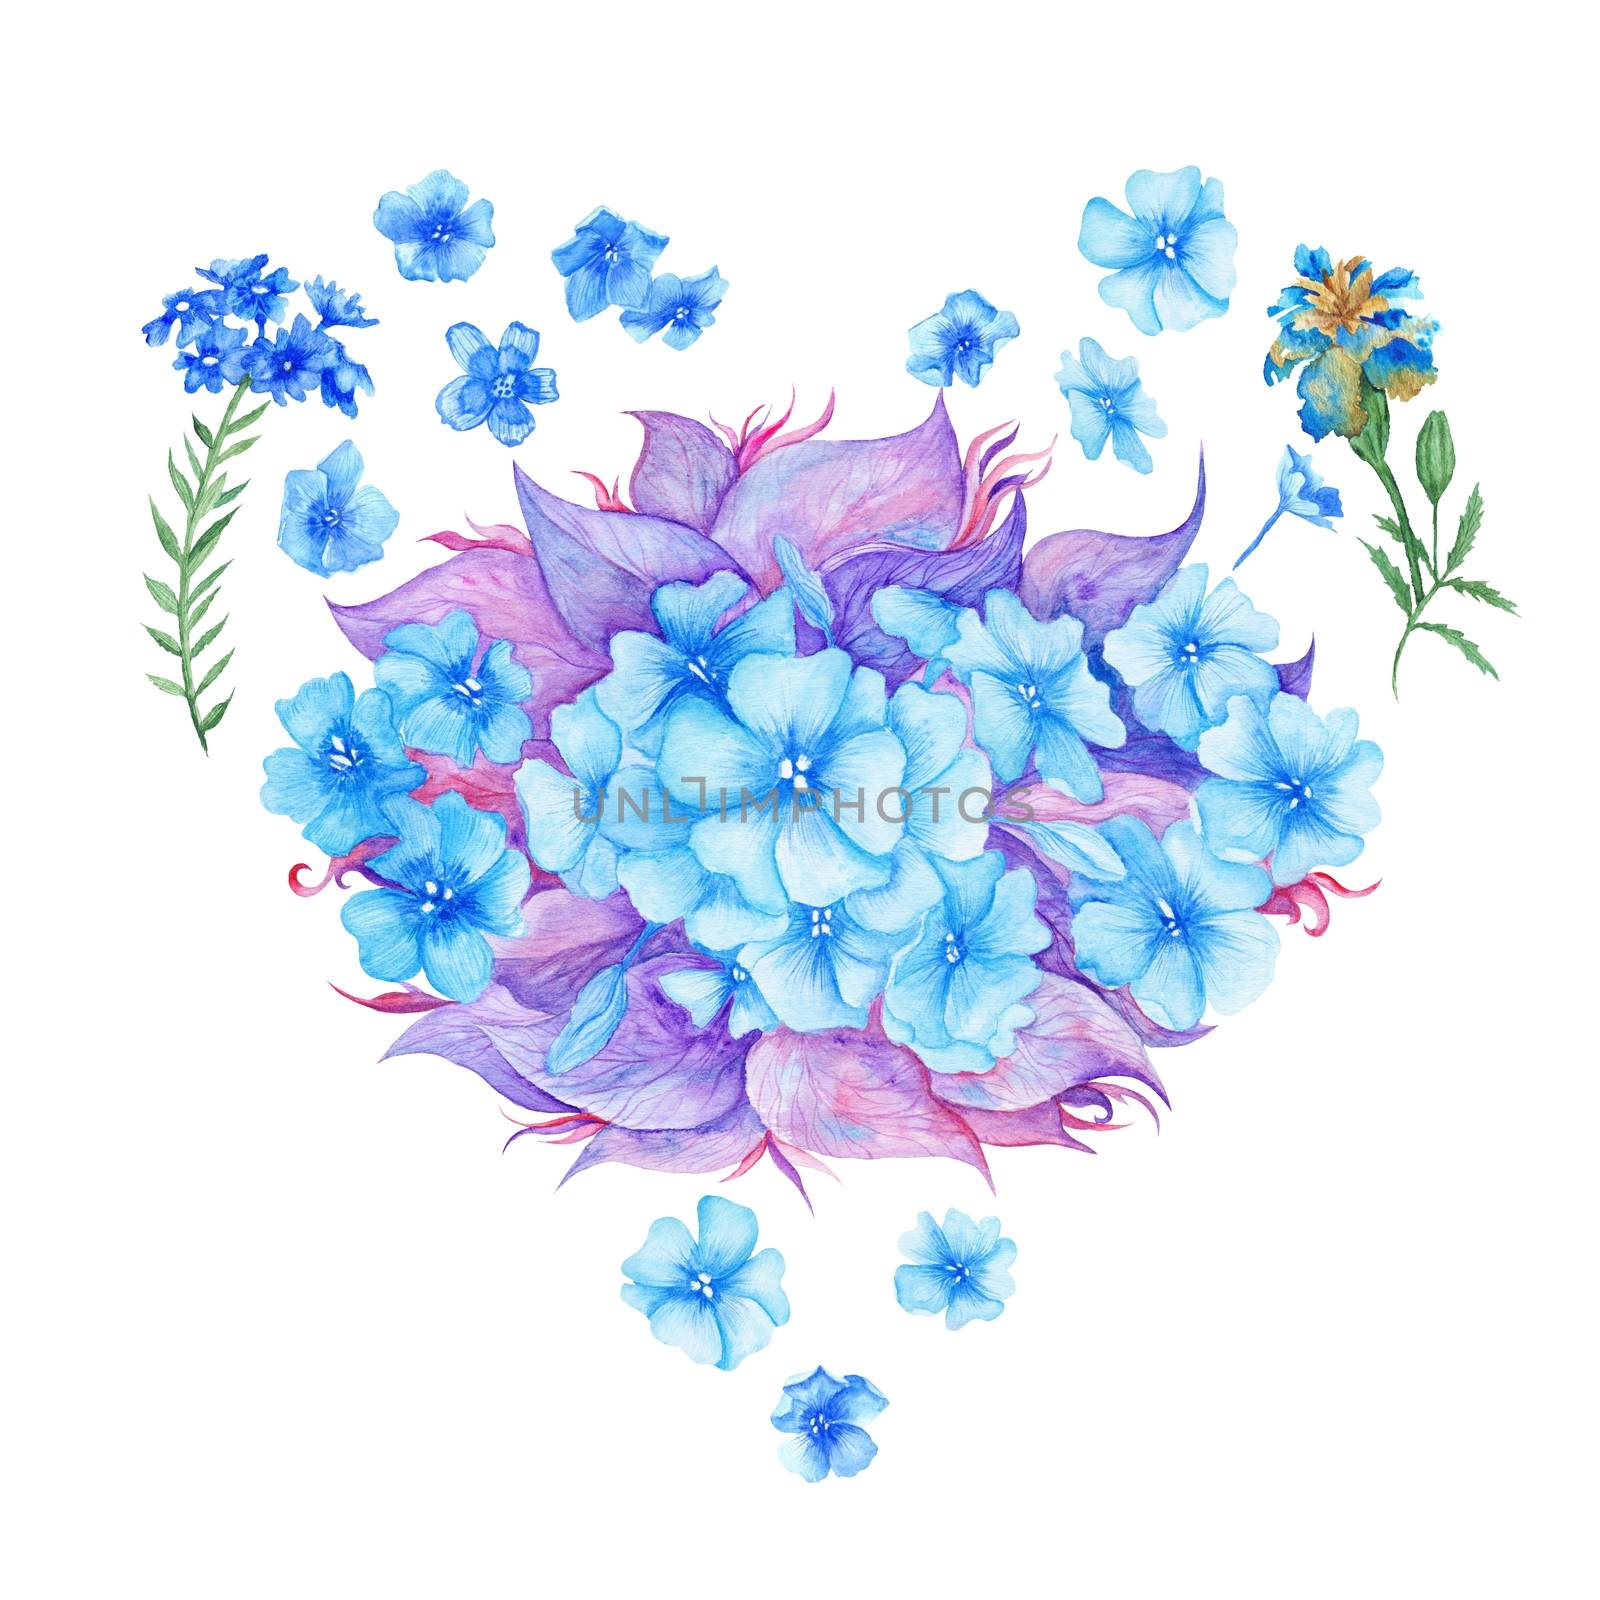 Watercolor Floral Heart by kisika